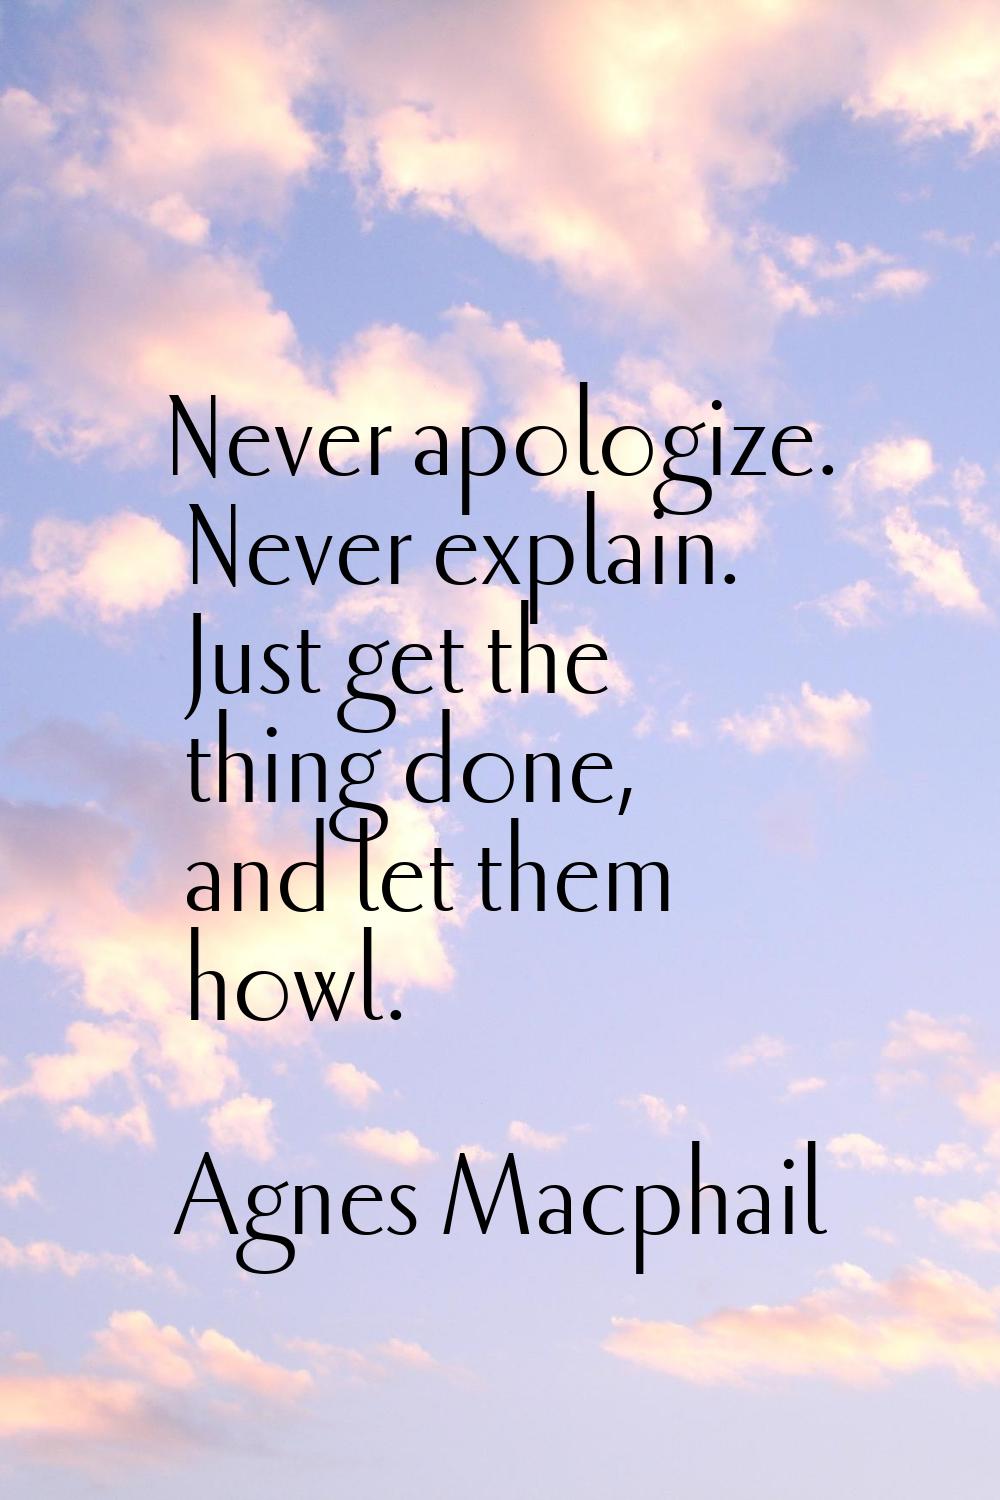 Never apologize. Never explain. Just get the thing done, and let them howl.